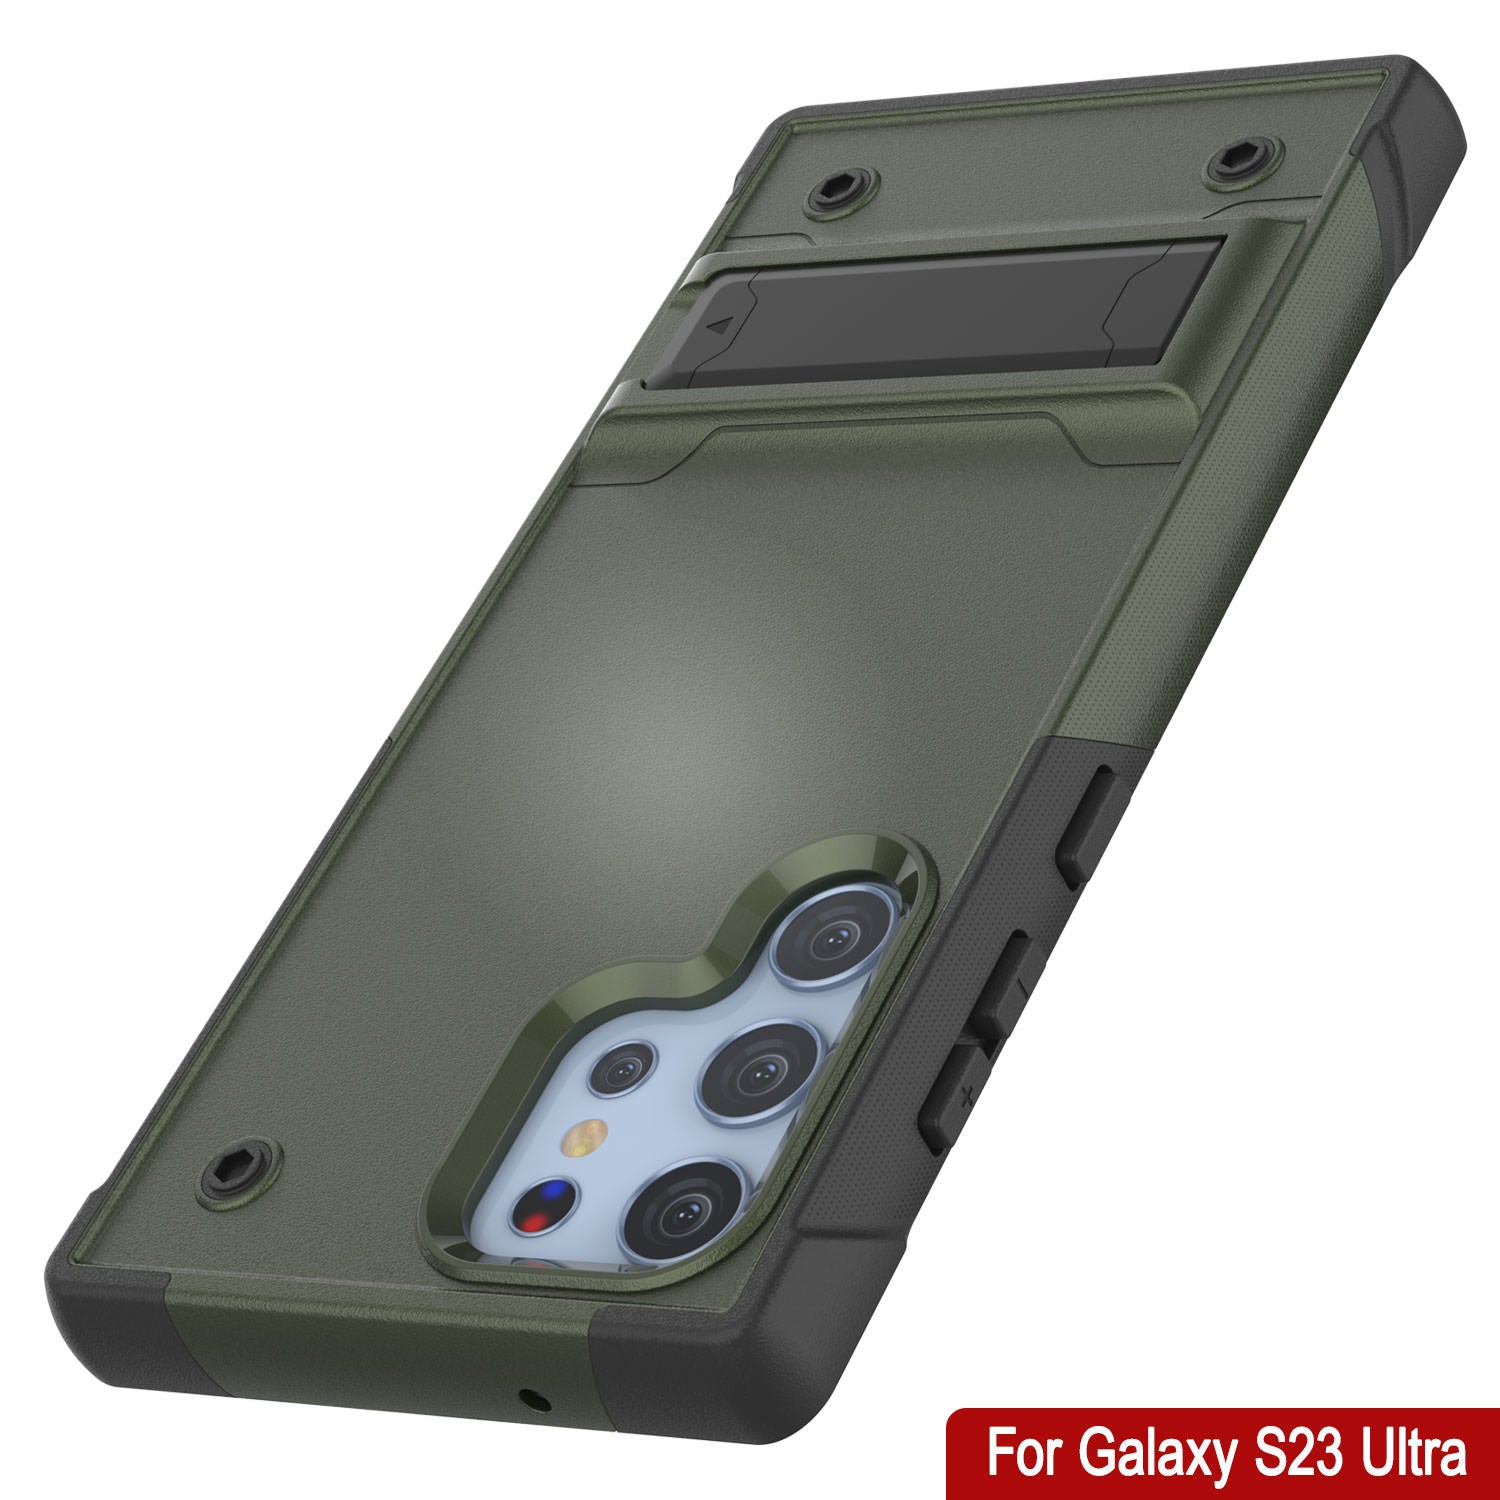 Punkcase Galaxy S24 Ultra Case [Reliance Series] Protective Hybrid Military Grade Cover W/Built-in Kickstand [Army-Green-Black]